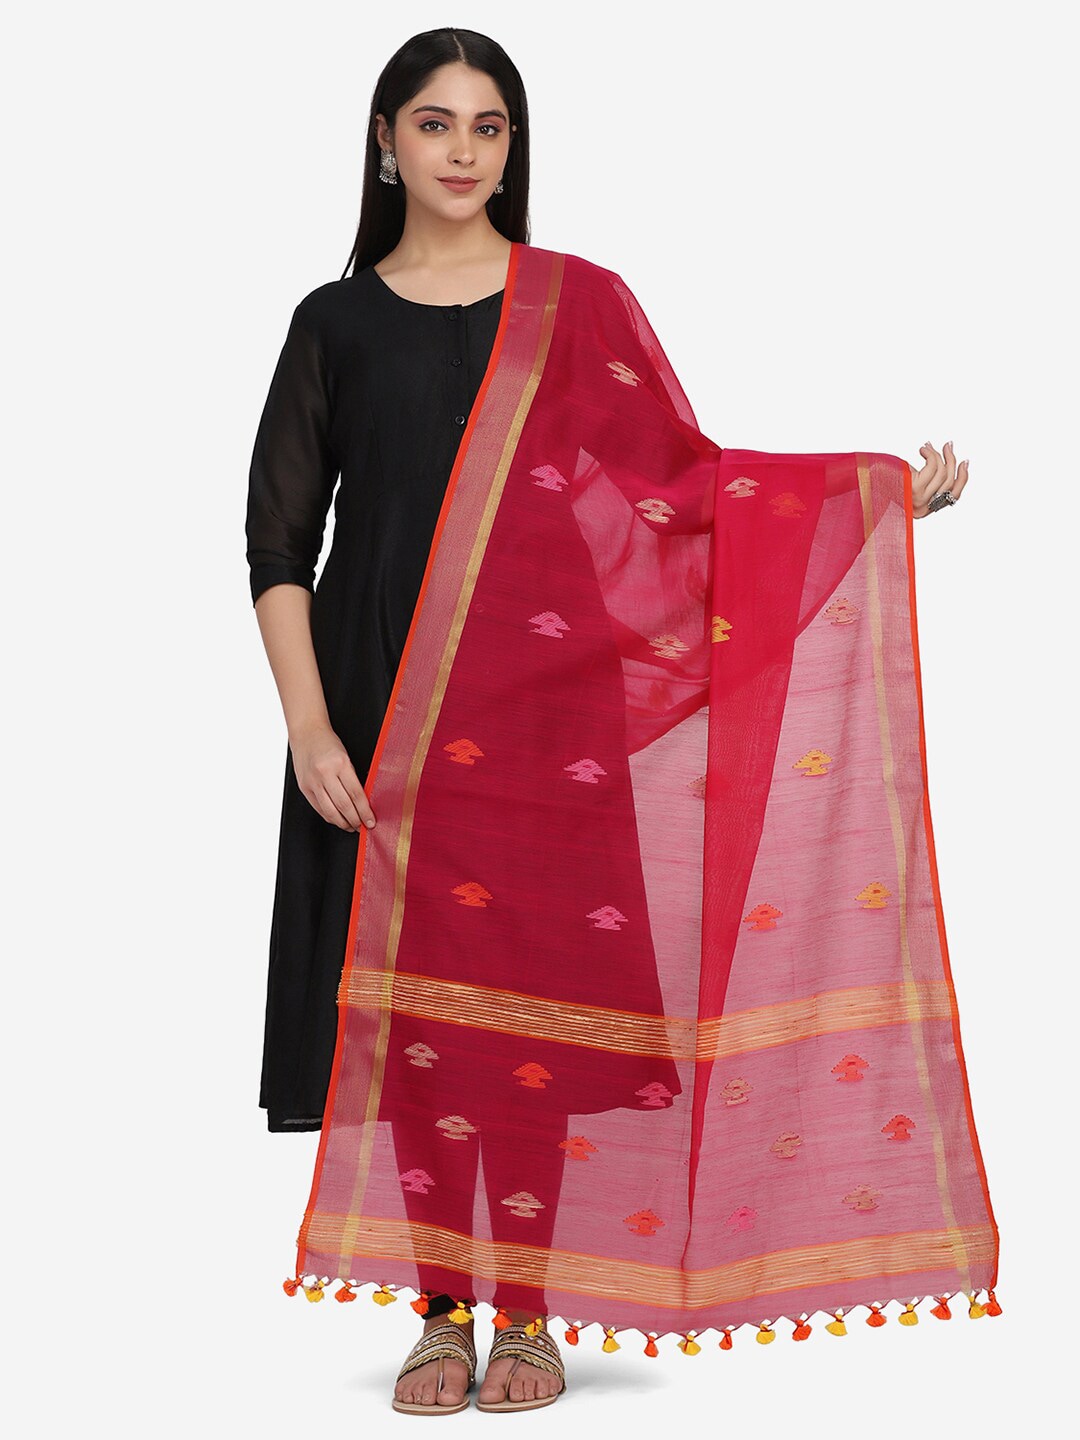 THE WEAVE TRAVELLER Pink & Gold-Toned Ethnic Motifs Woven Design Dupatta with Zari Price in India